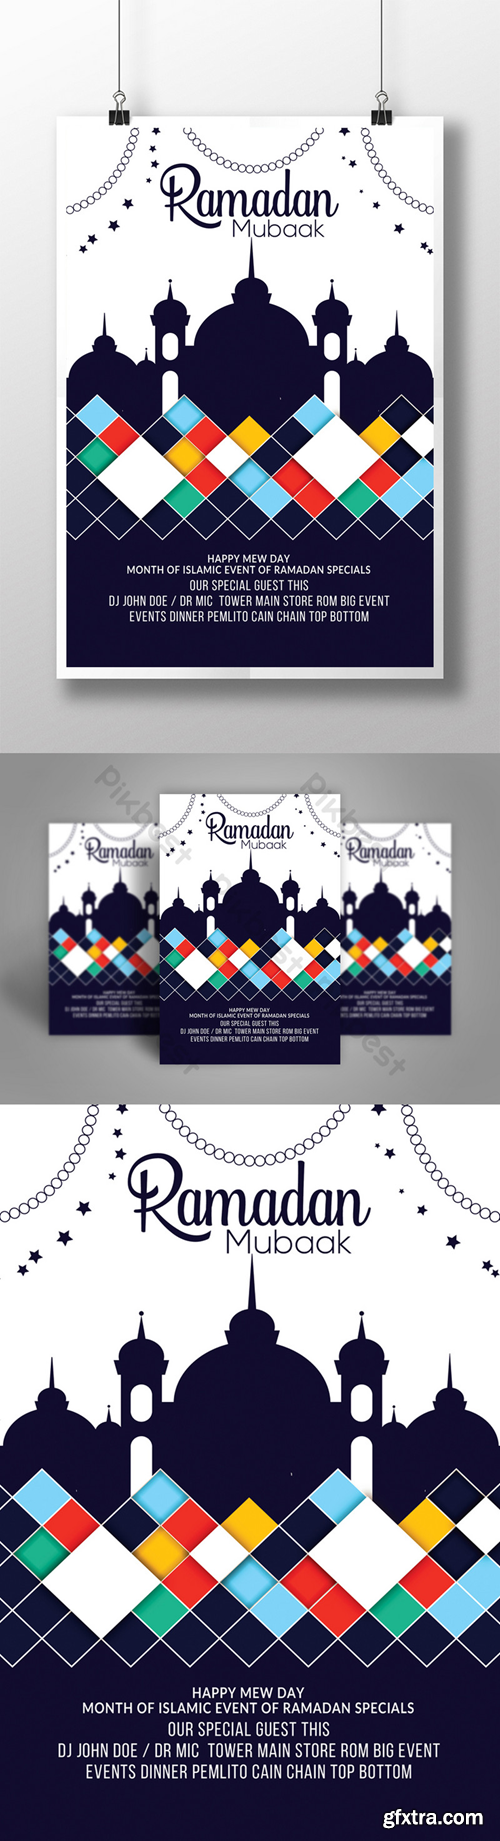 Ramadan Muslim Event Poster Templates with Mosque Silhouette Template PSD